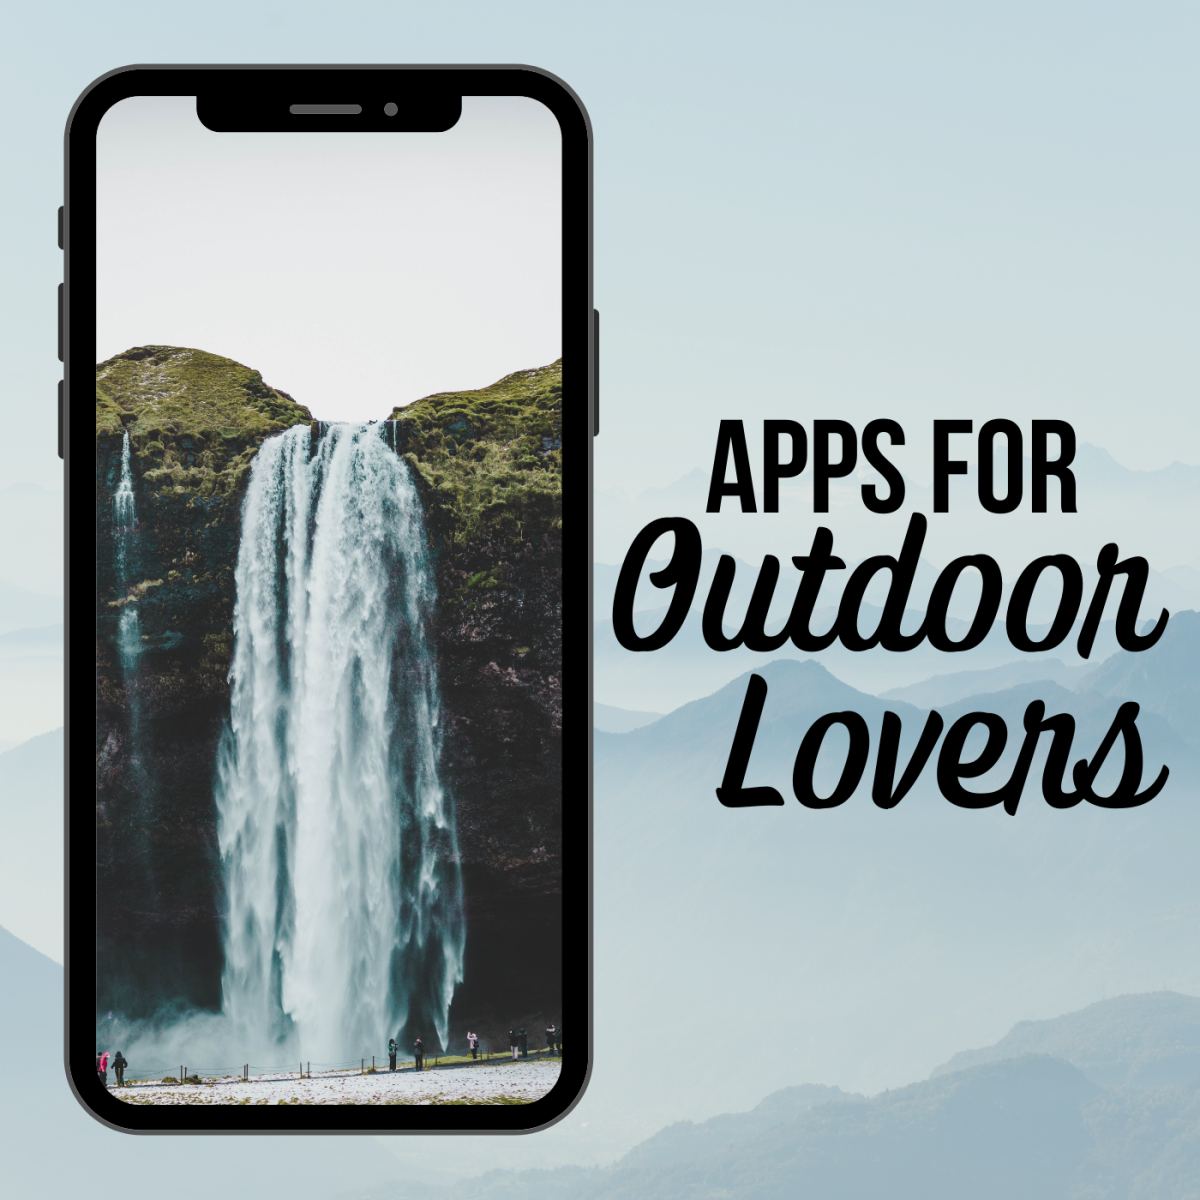 Find the best smartphone apps with services and safety information for hikers, bikers, and all those who love the great outdoors!